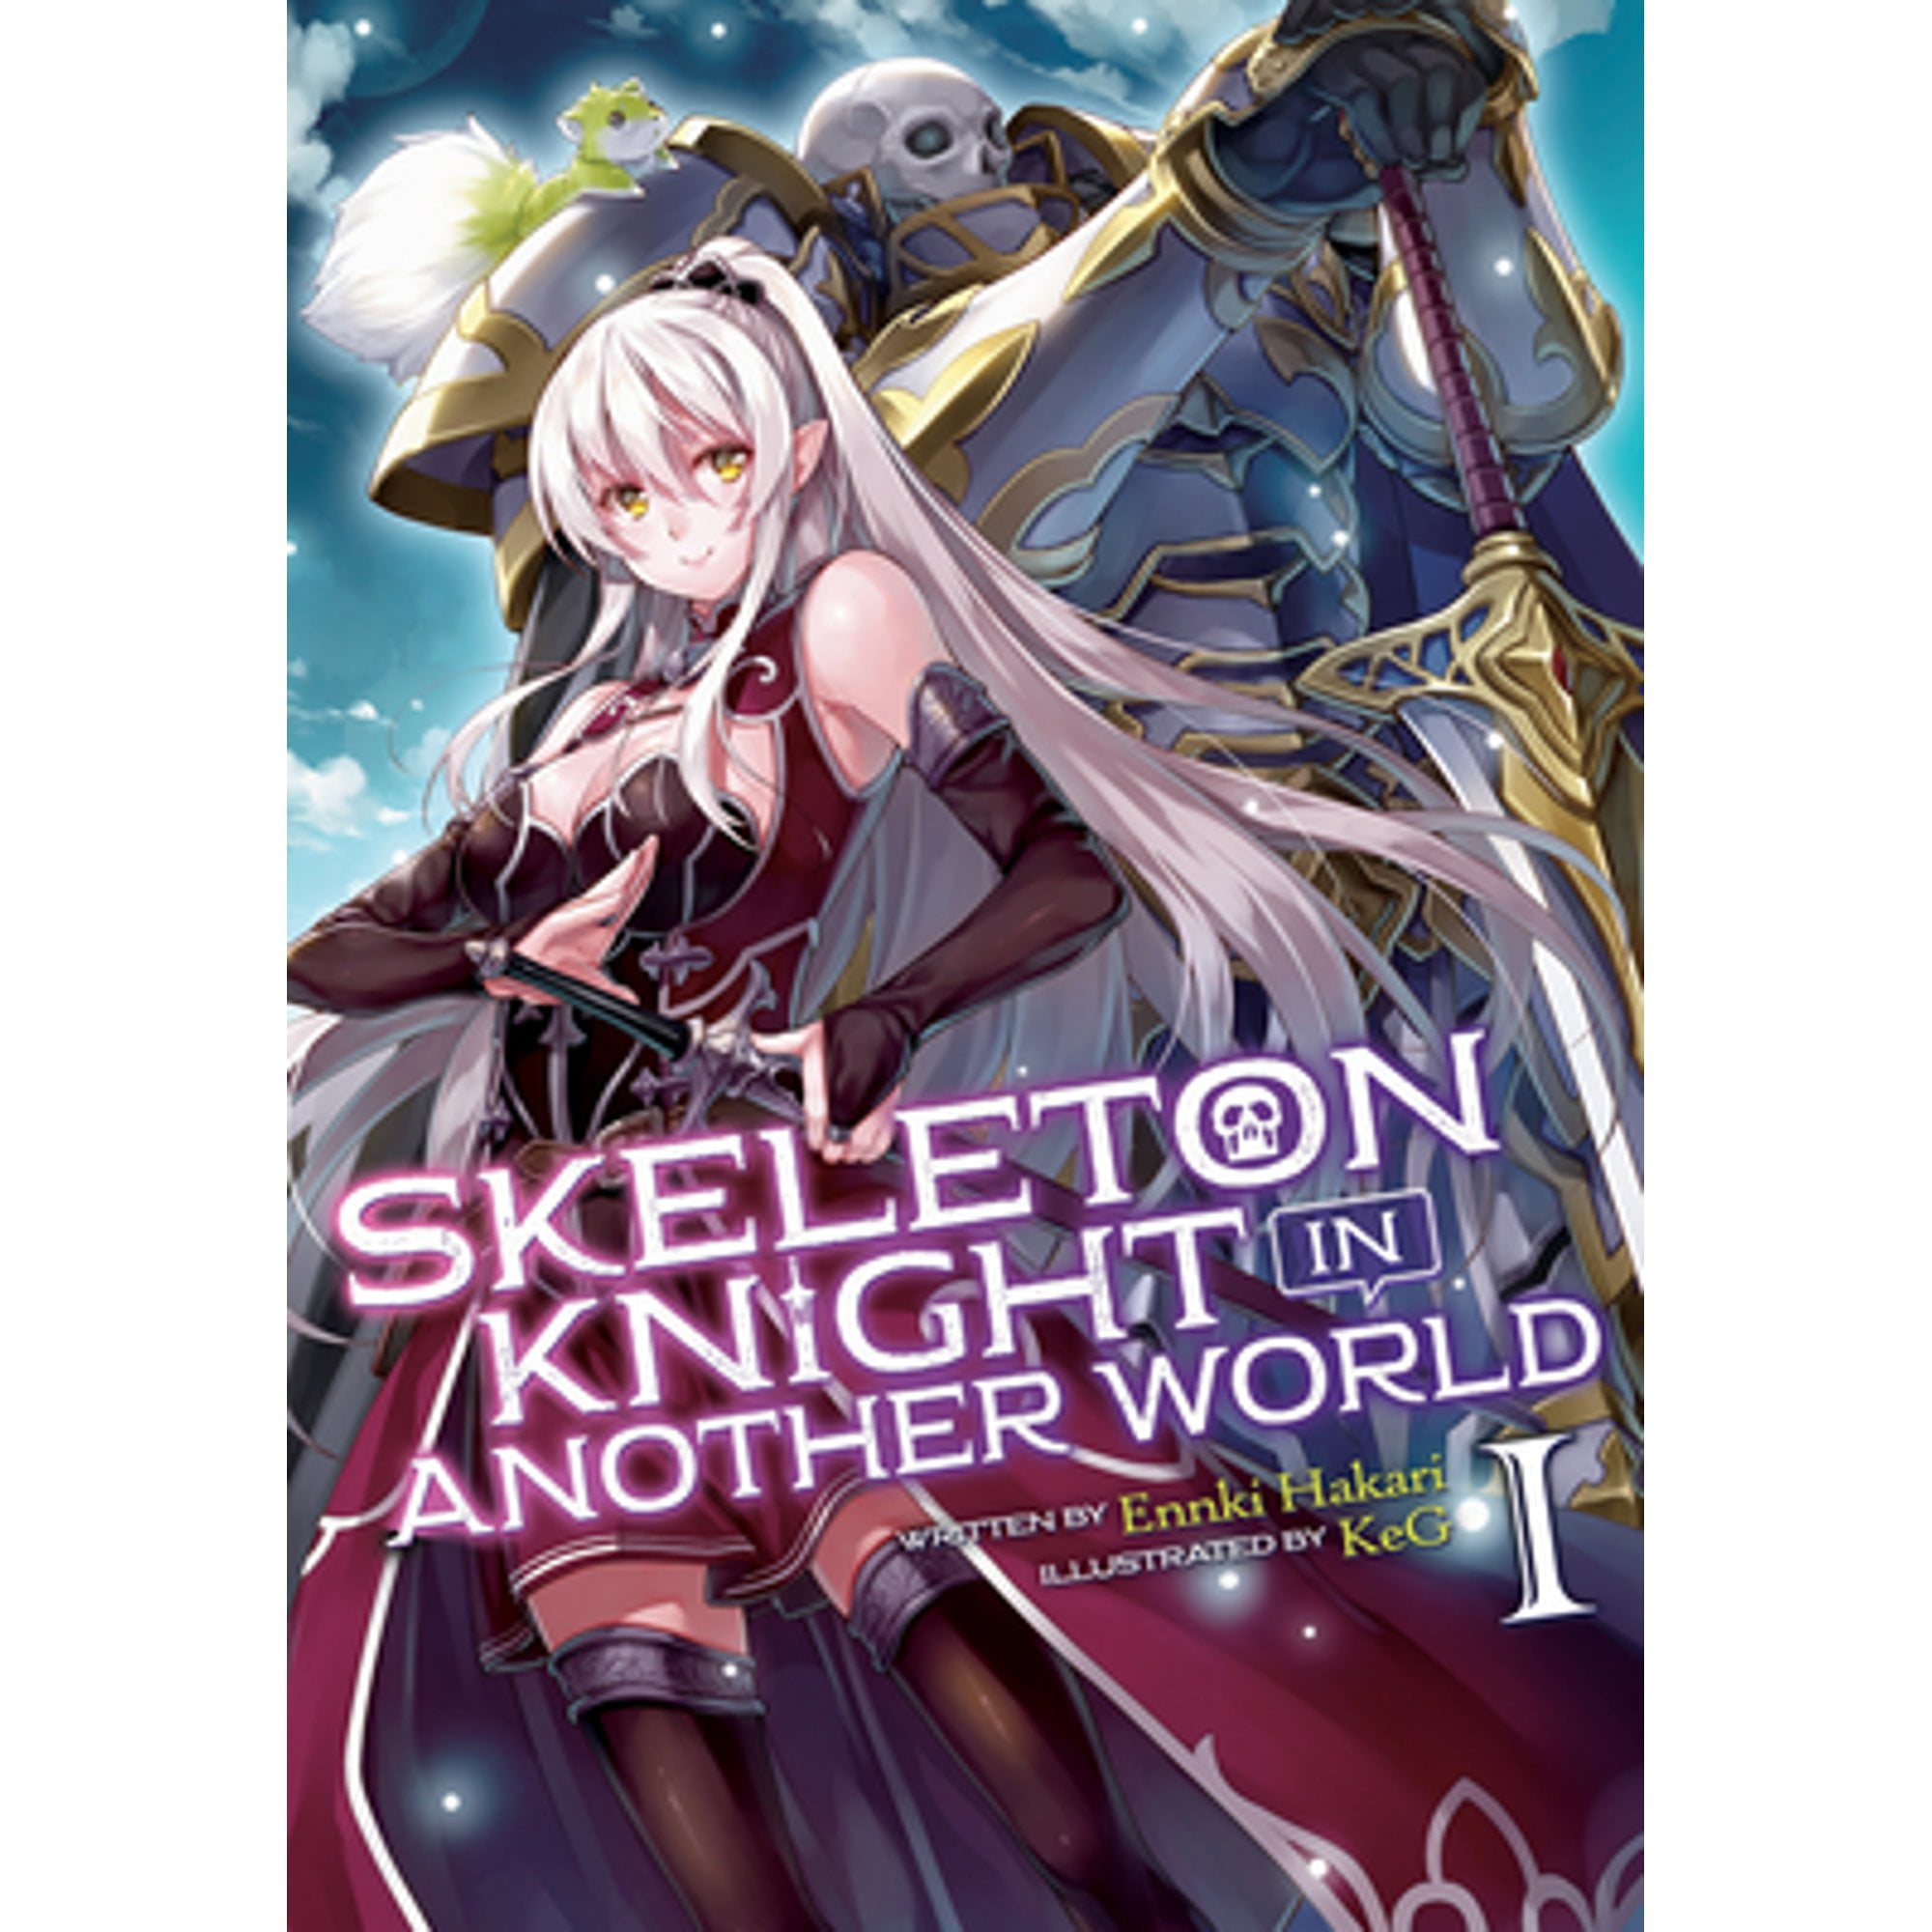 Skeleton Knight in Another World - Opening